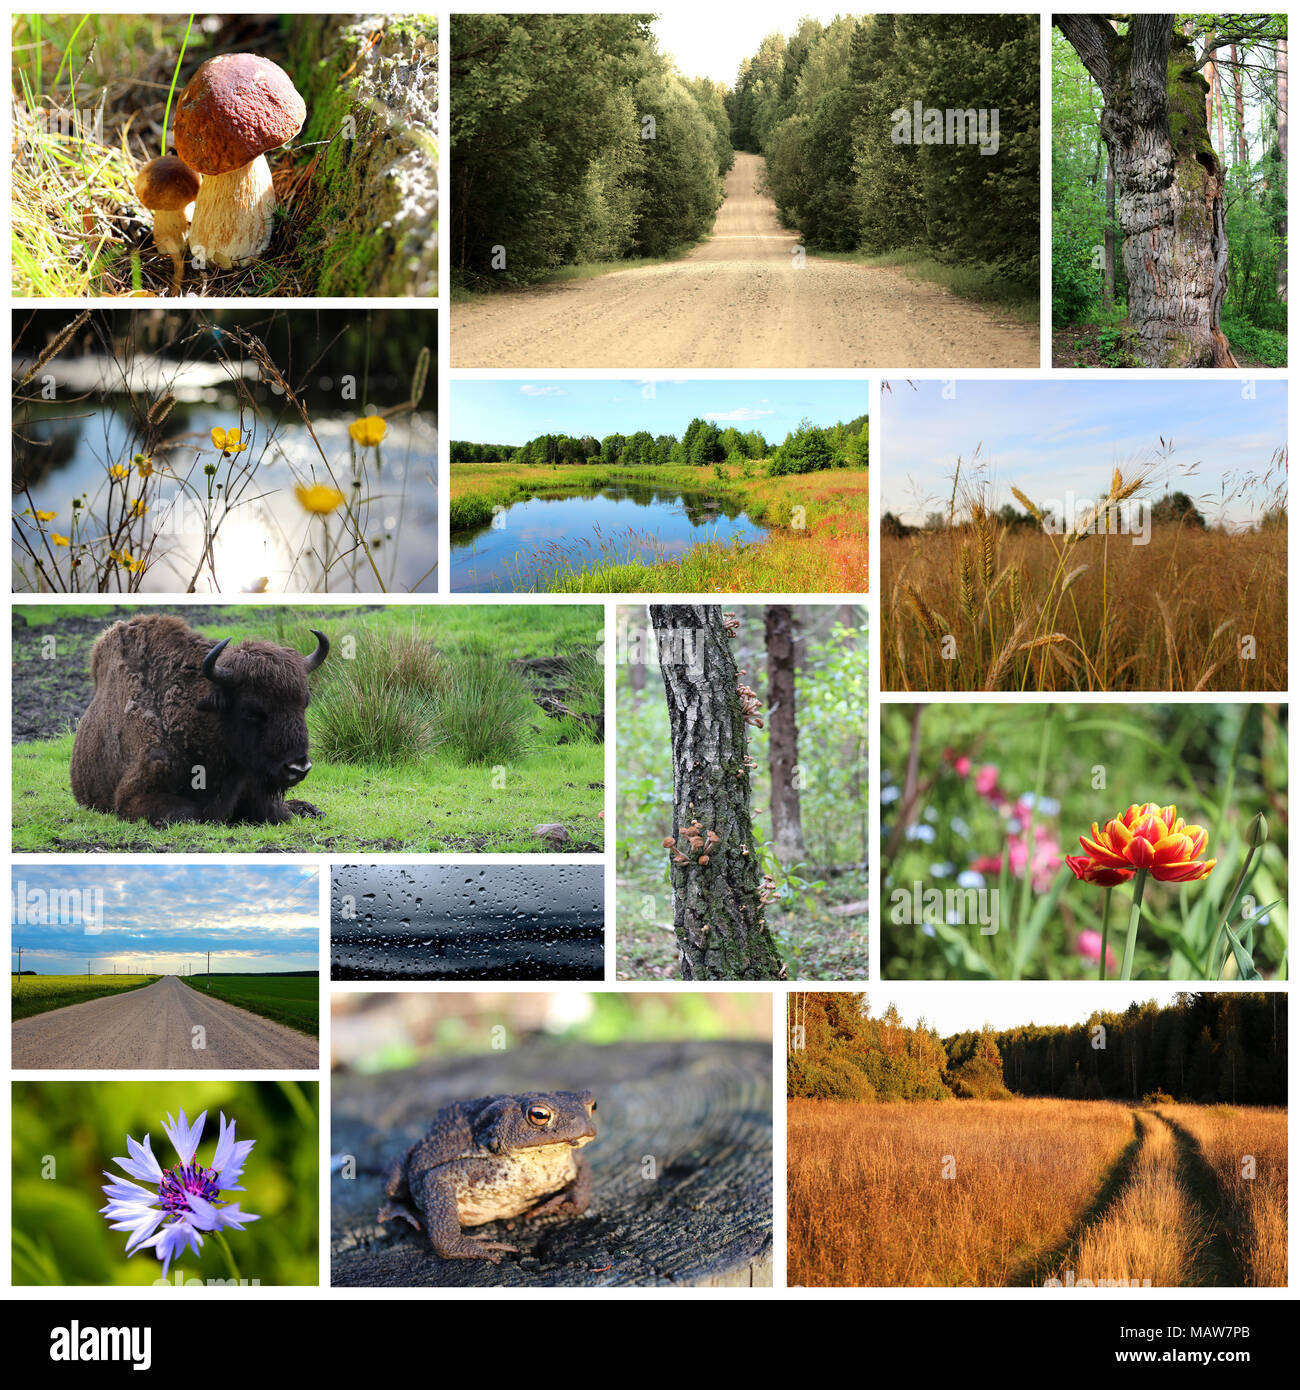 Collage of nature photos Stock Photo